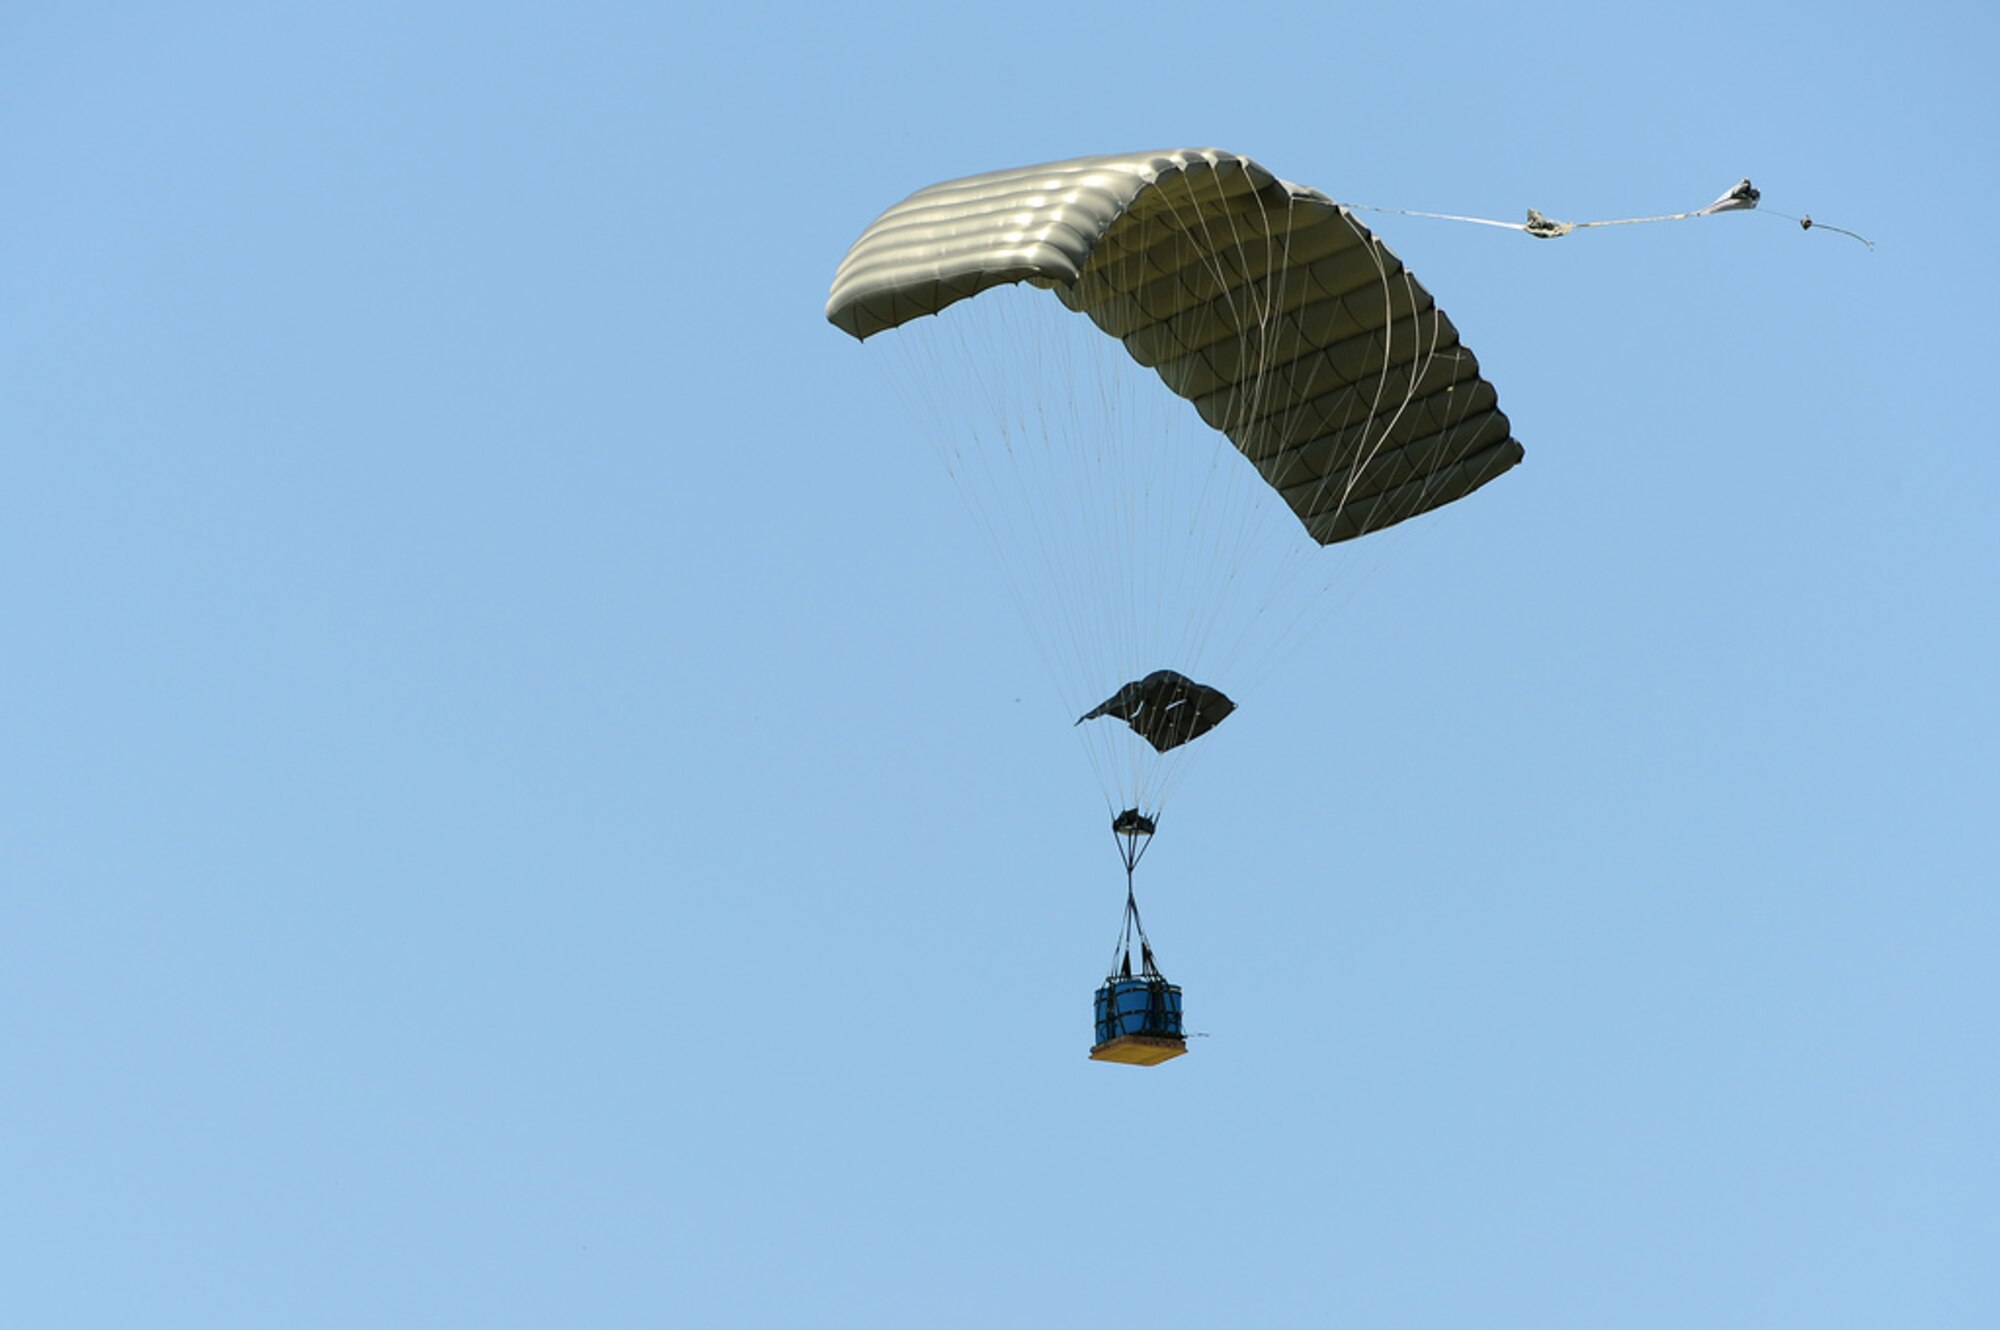 A Joint Precision Airdrop System (JPADS) bundle descends to the ground during a training exercise Tuesday, April 24, at the Antelope Drop Zone at Fort Hood. JPADS is an airdrop system that uses Global Positioning Satellite, steerable parachutes and an onboard computer to steer loads to a designated point of impact on a drop zone. (Photo by Daniel Cernero, III Corps and Fort Hood Public Affairs)